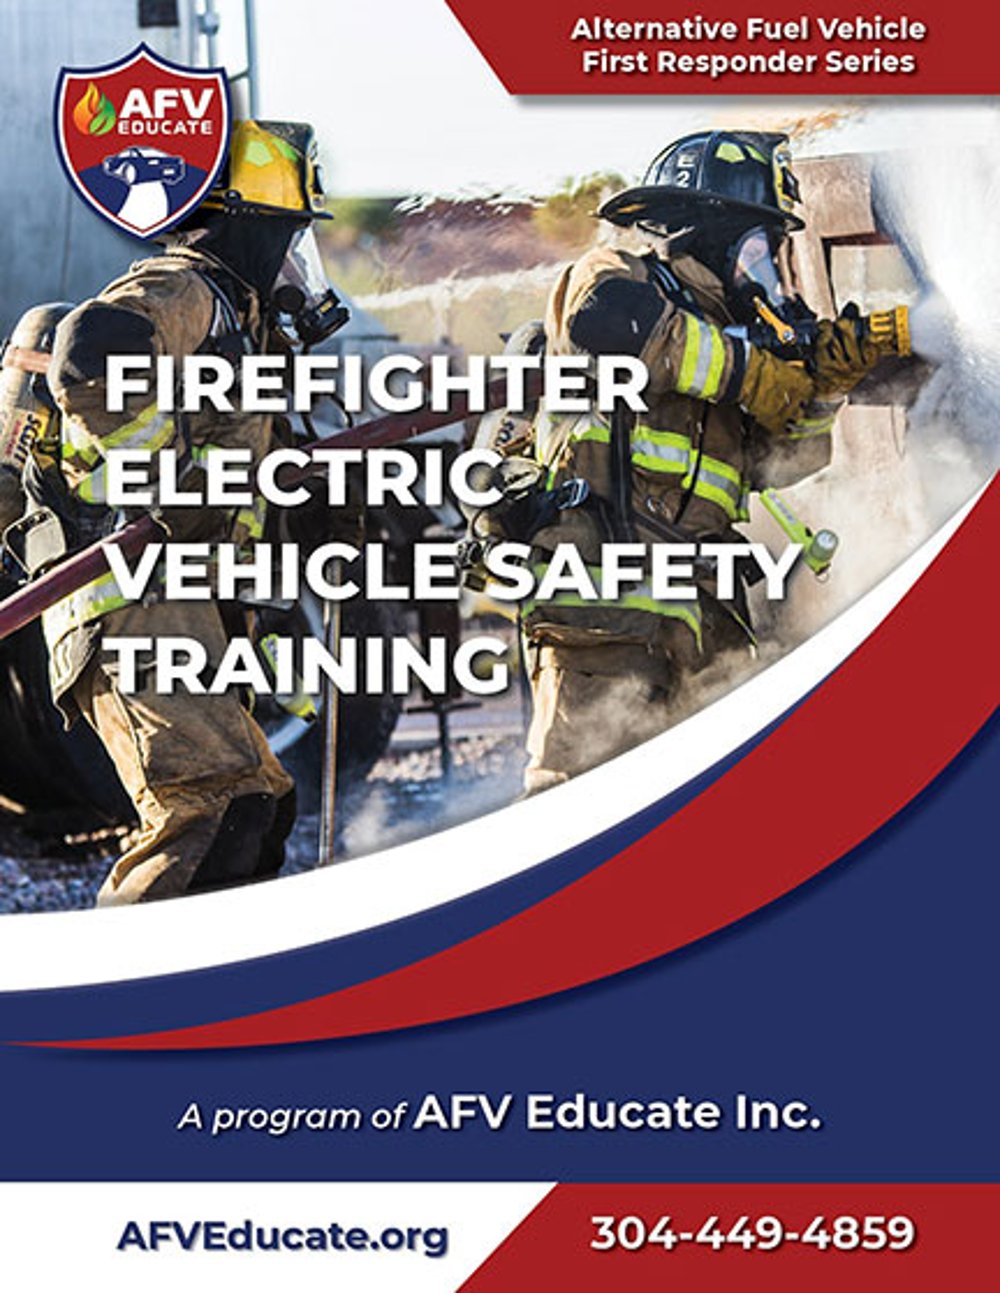 AFV Educate Firefighter Electric Vehicle Safety Training Manual